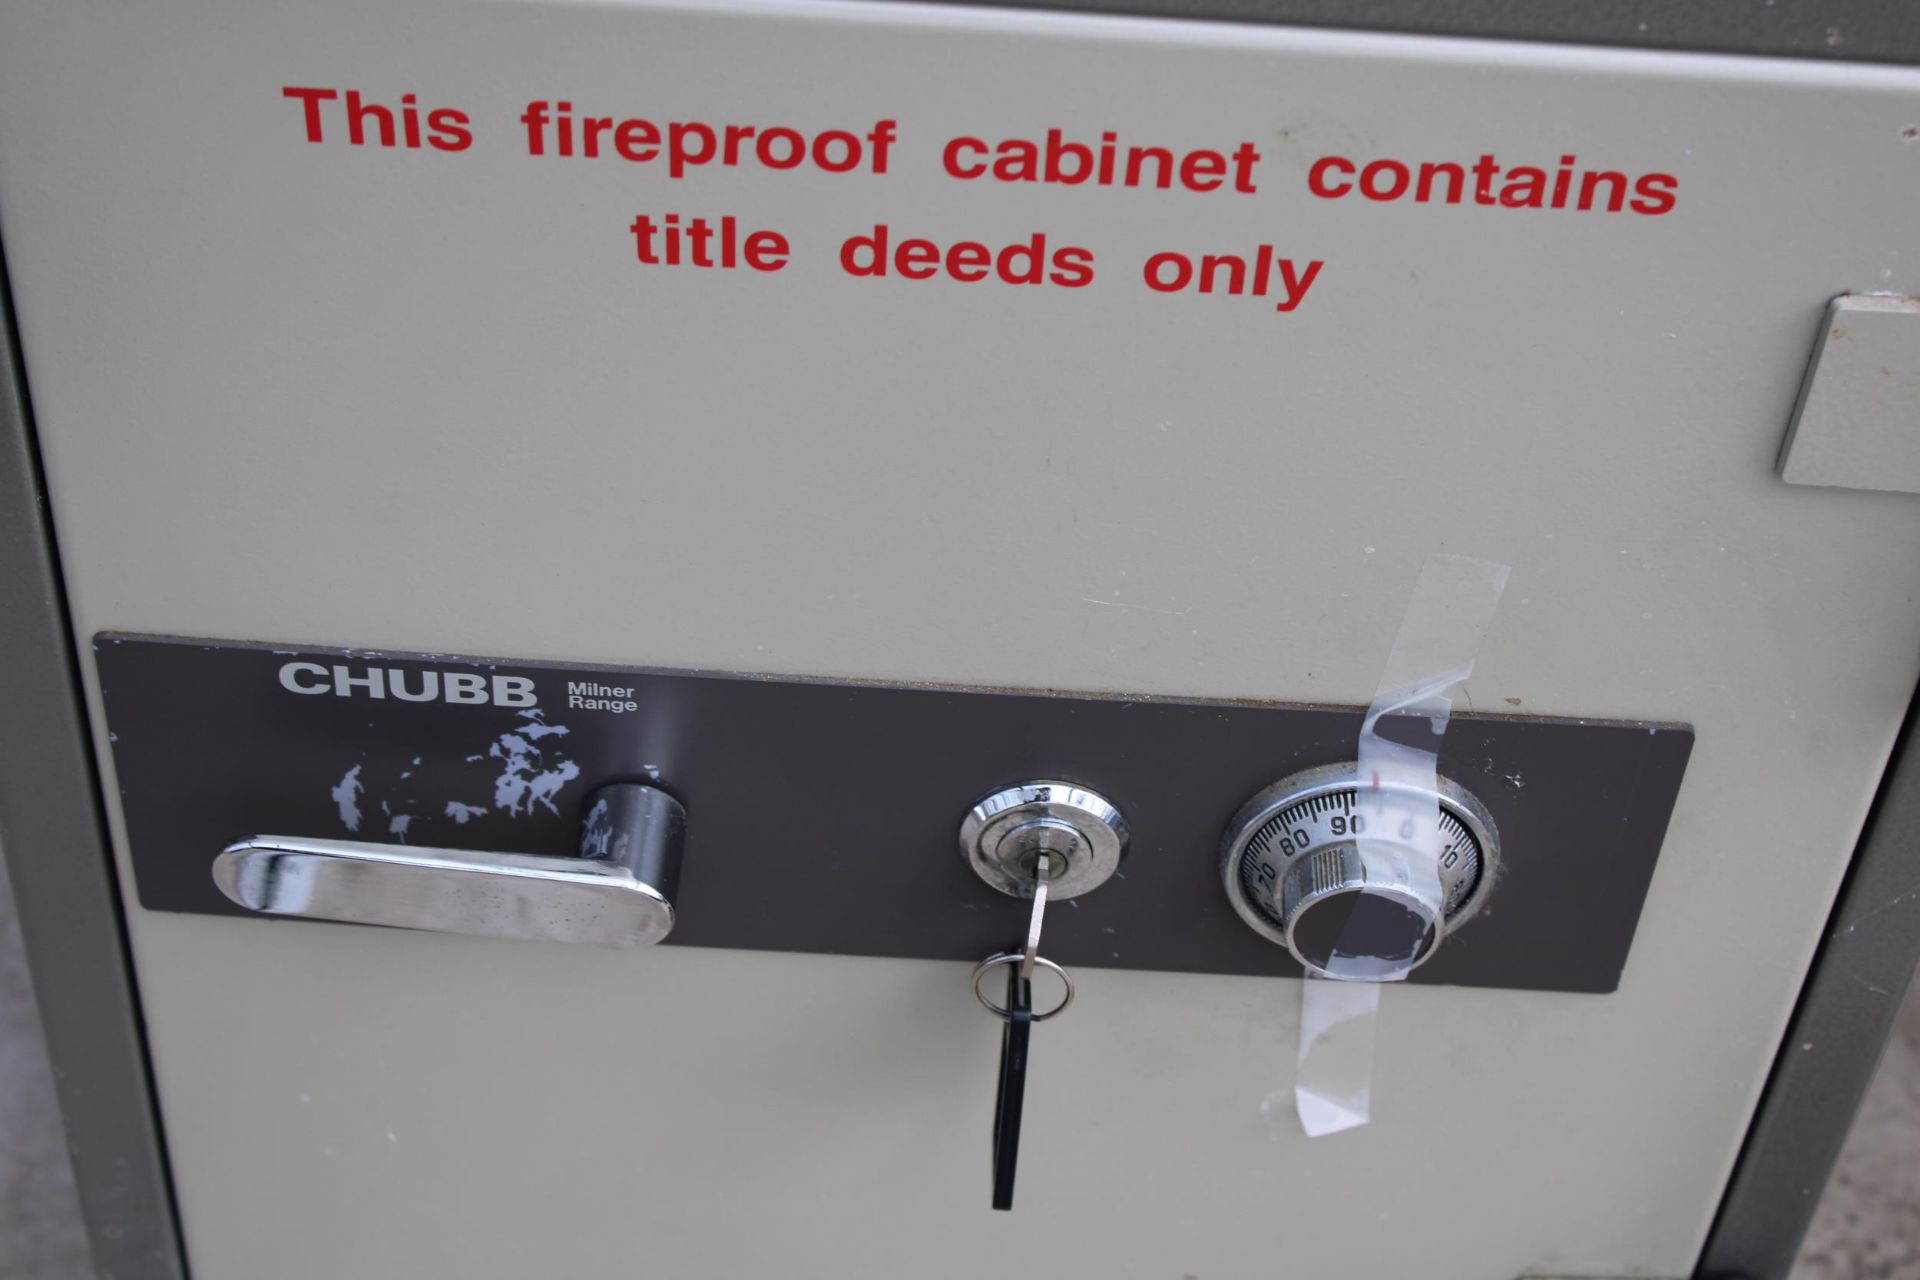 A CHUBB FIREPROOF SAFE COMPLETE WITH KEY - Image 3 of 6